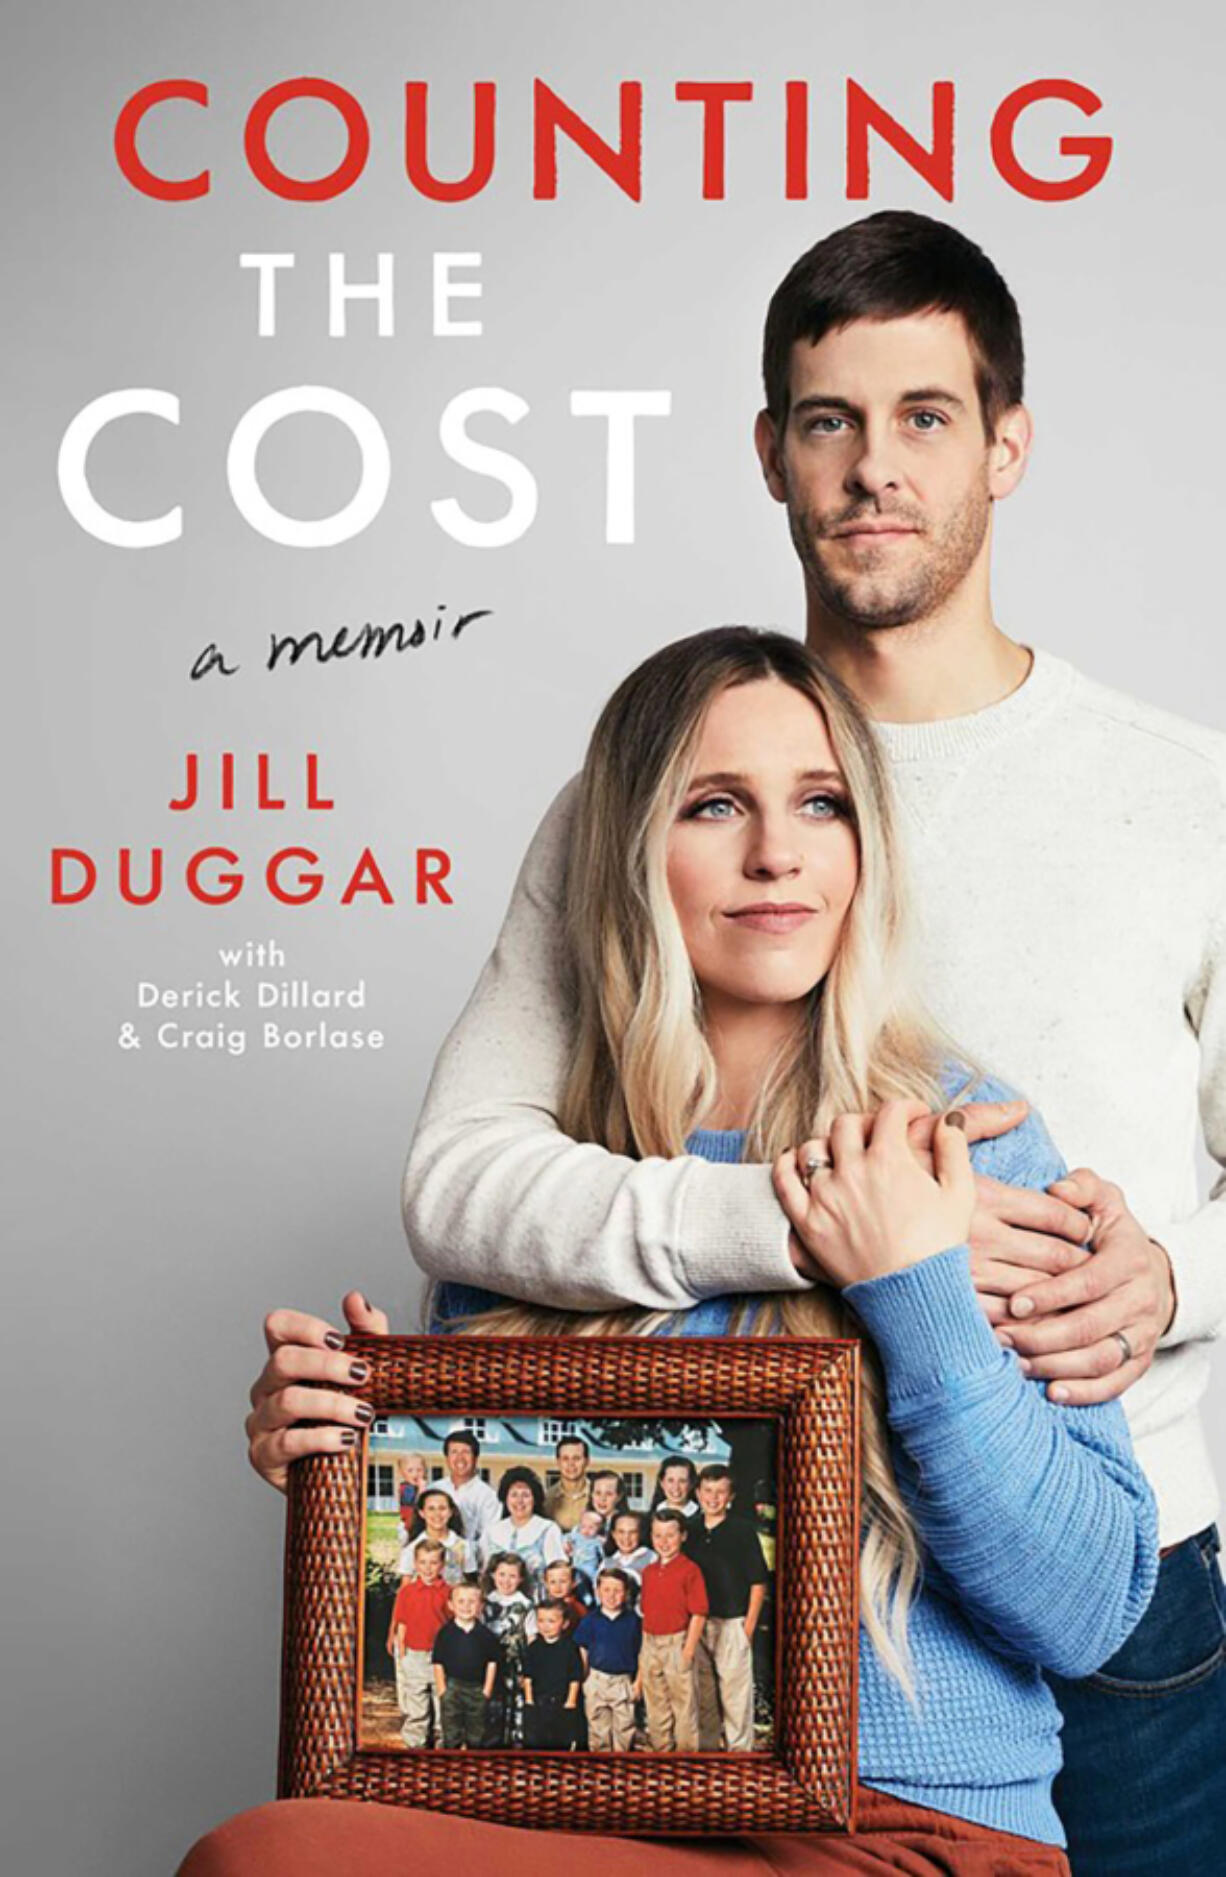 "Counting the Cost," by Jill Duggar.